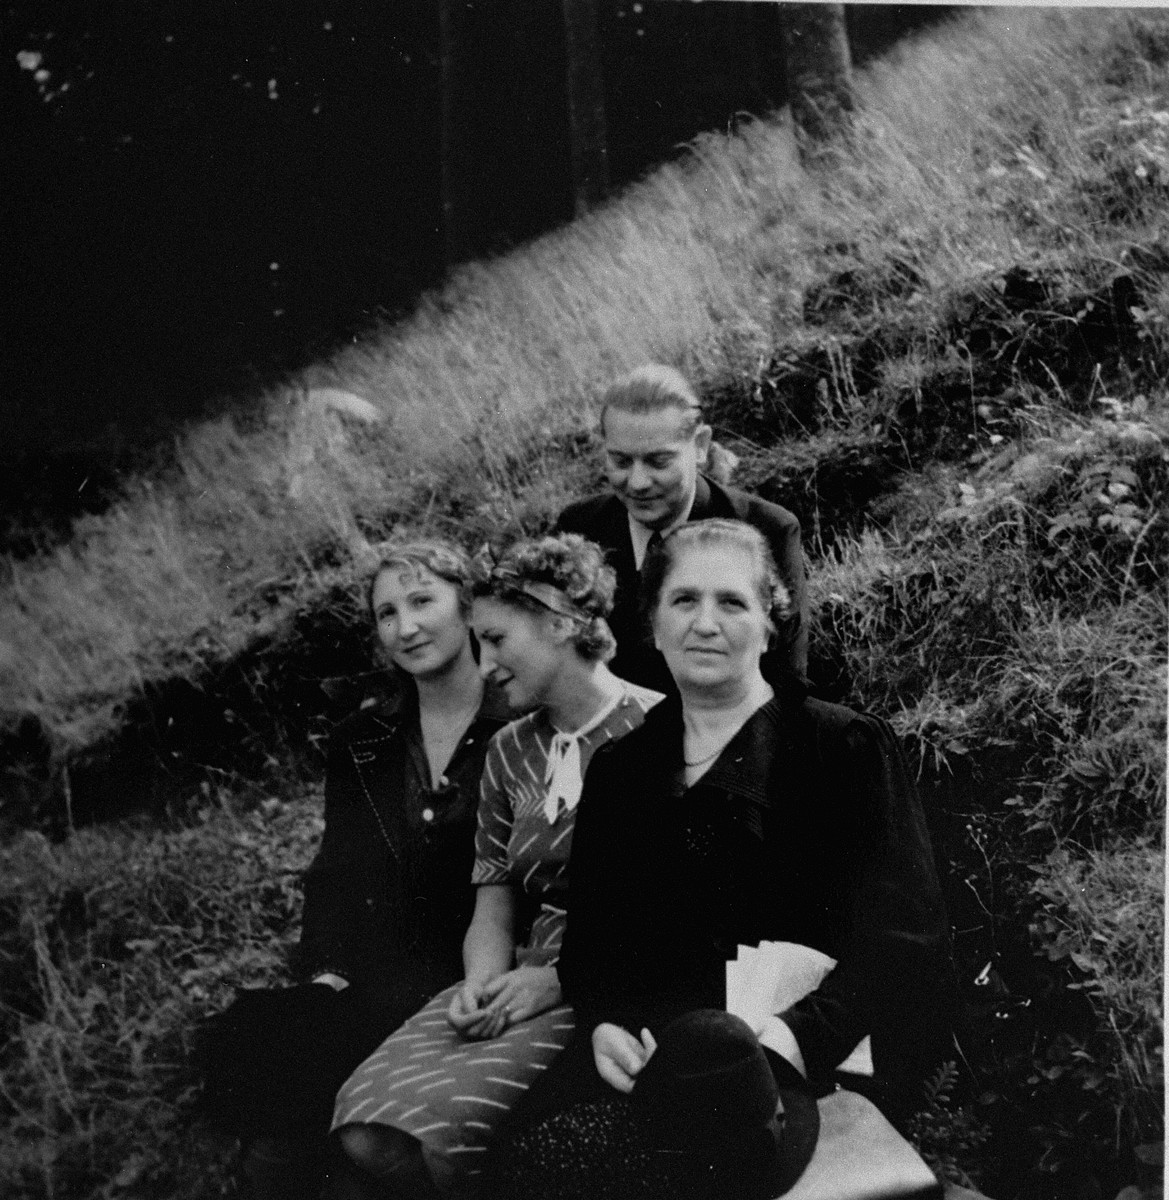 Dr. Joseph Jaksy poses on a hillside in Bratislava with members of the Suran family, whom he rescued during WWII. 

Pictured with Dr. Jaksy from left to right are Valeria, Lydia and Mrs. Suran.

The Surans were among the 25 Jews rescued by Dr. Joseph Jaksy during WWII.  Jaksy engineered the fictitious purchase of the Suran's home in Bratislava; he provided false papers that allowed the Suran children to escape to South America; he registered the elder Surans as his own Slovak domestics; and, after a Gestapo search of the house, he provided Mrs. Suran with false papers and drove her to safety.